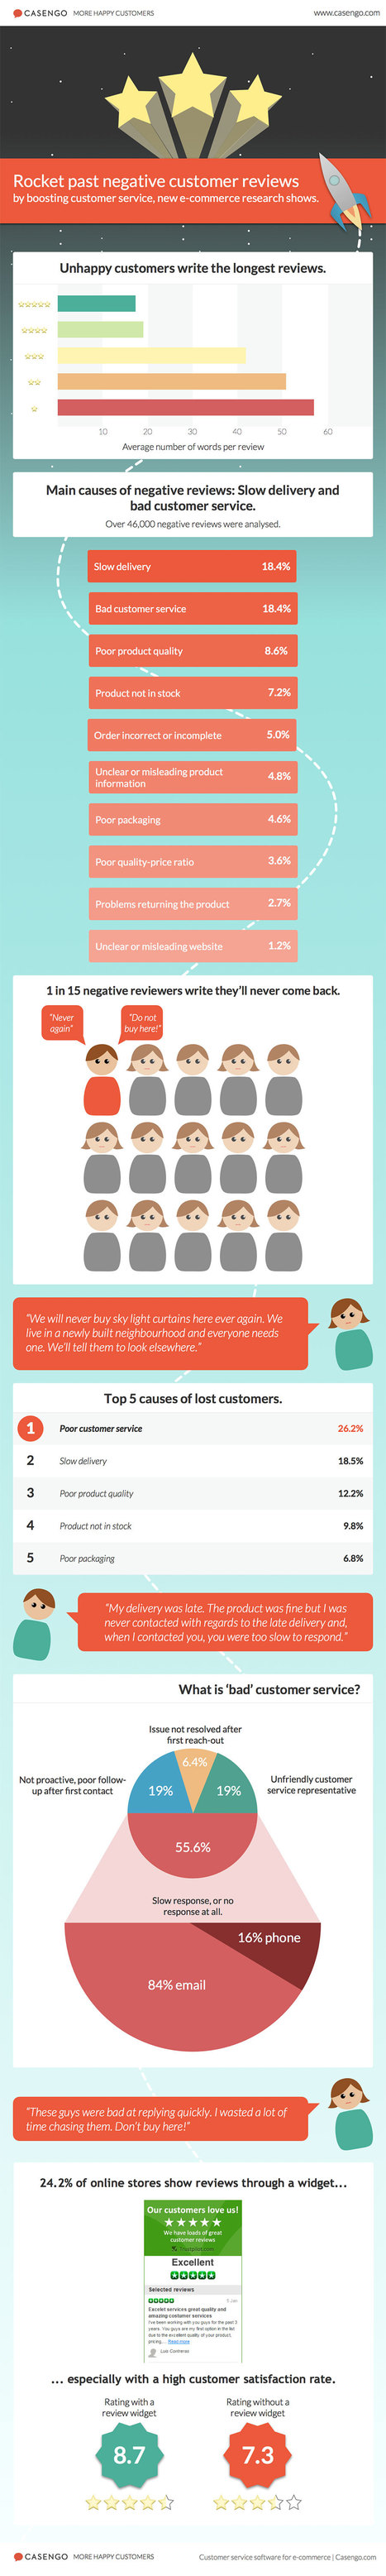 Why Bad Customer Experiences Happen - #Infographic | Customer Engagement | Scoop.it